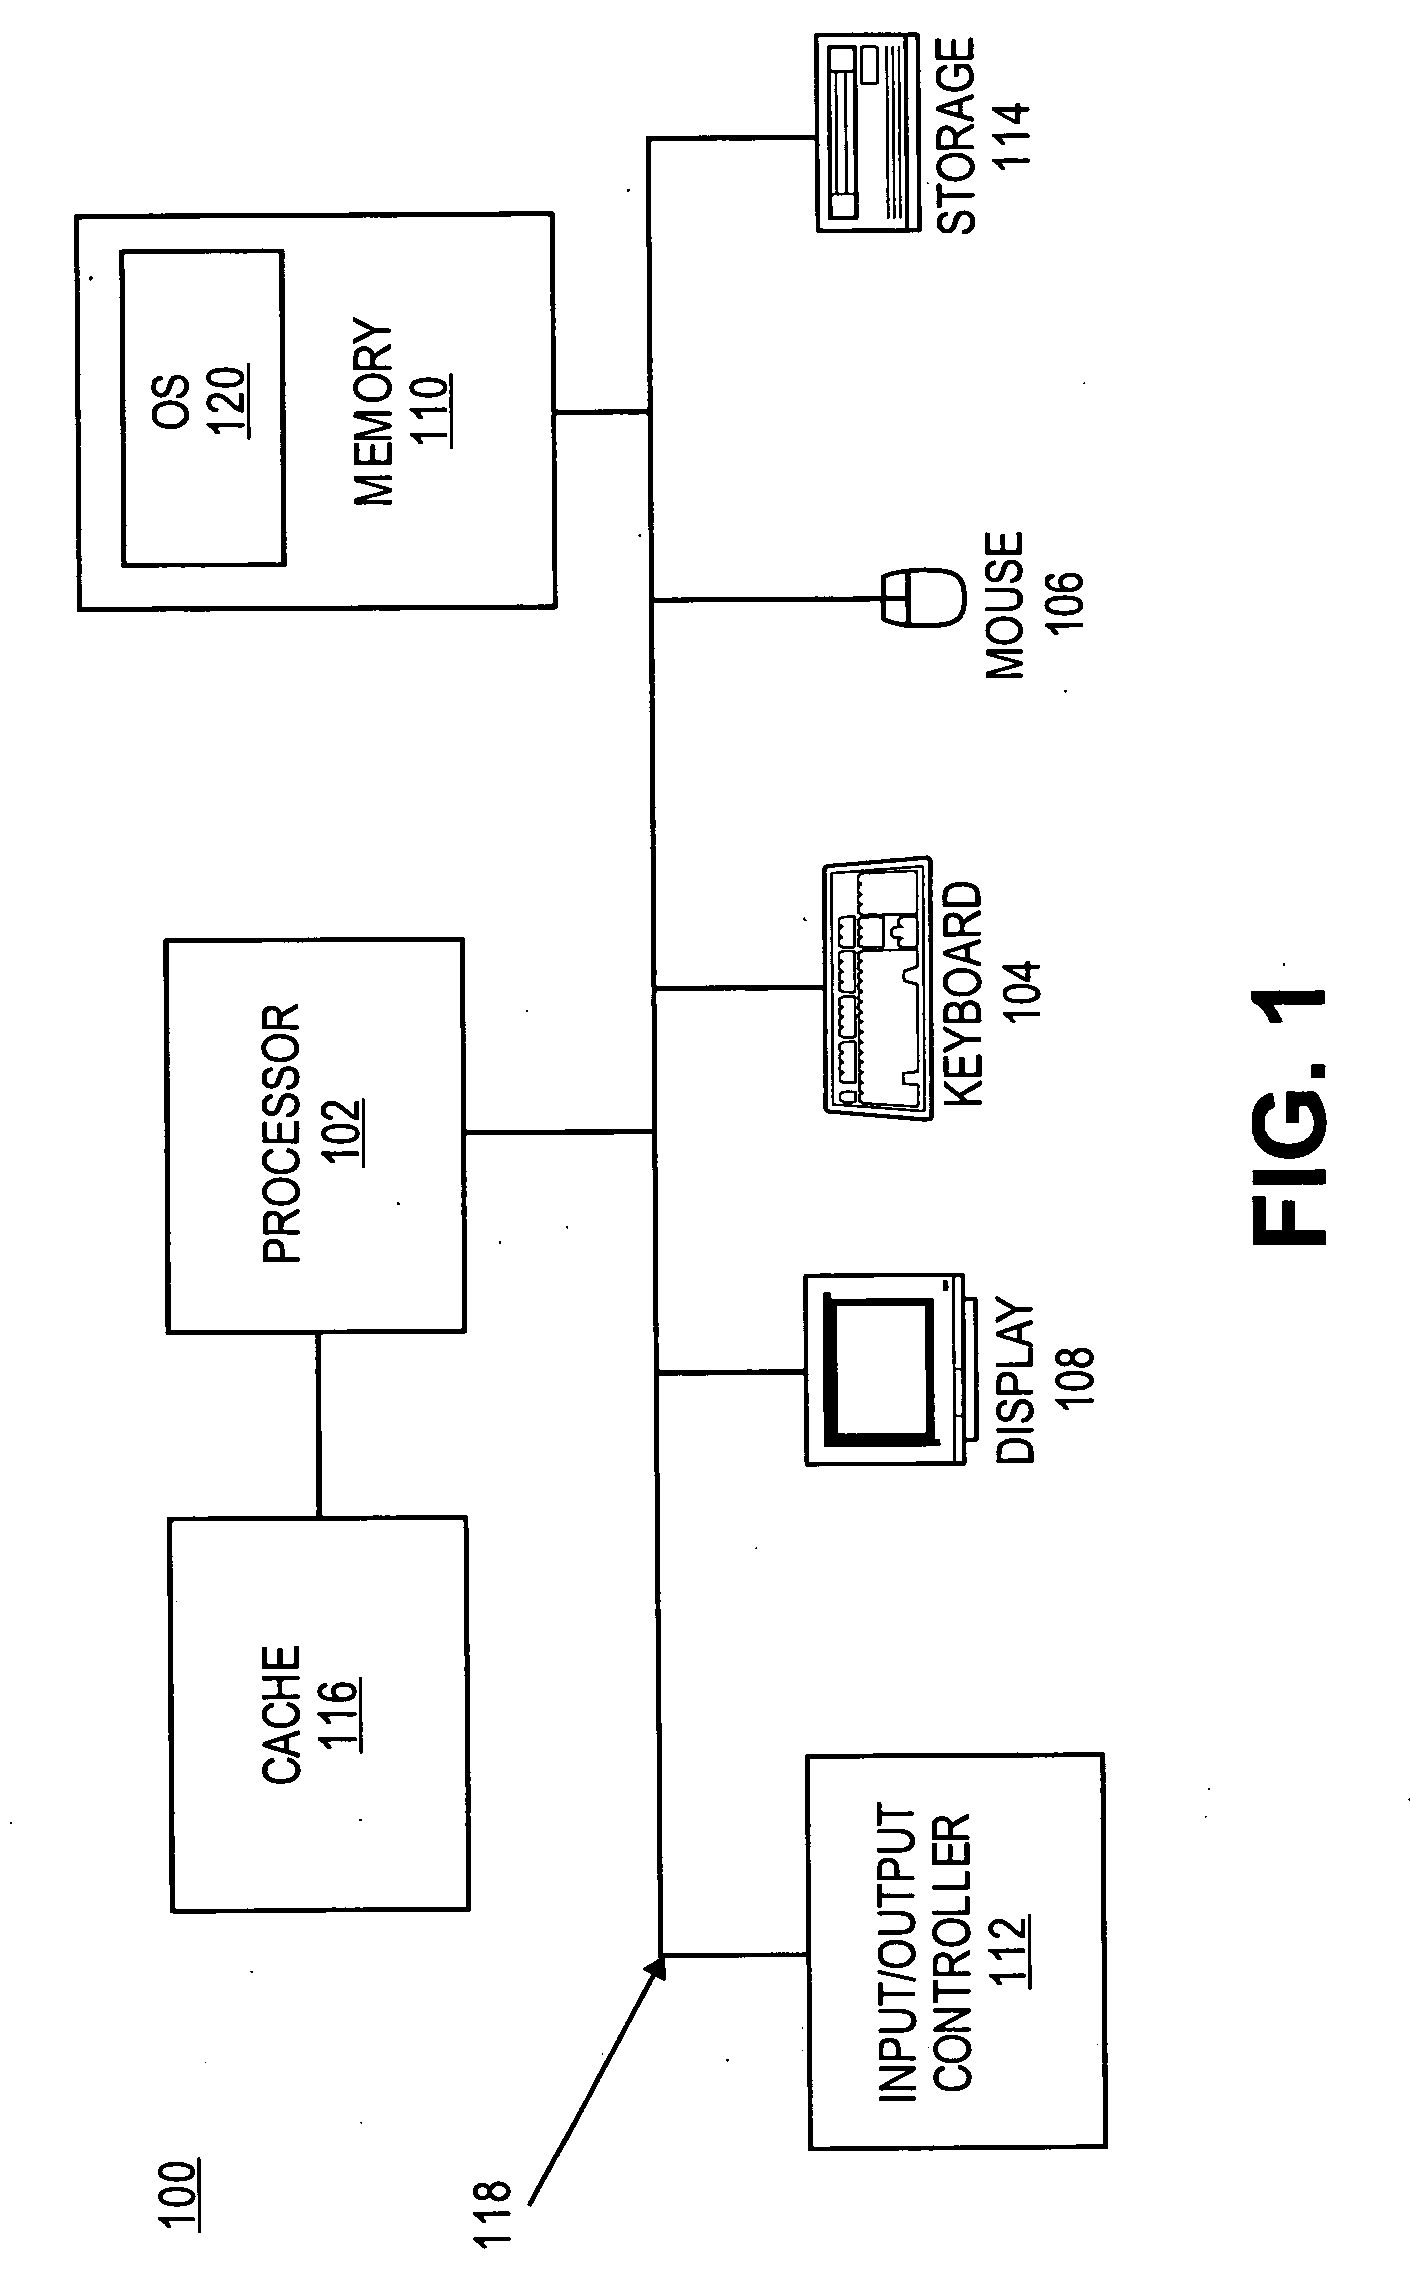 Method for tuning a cache